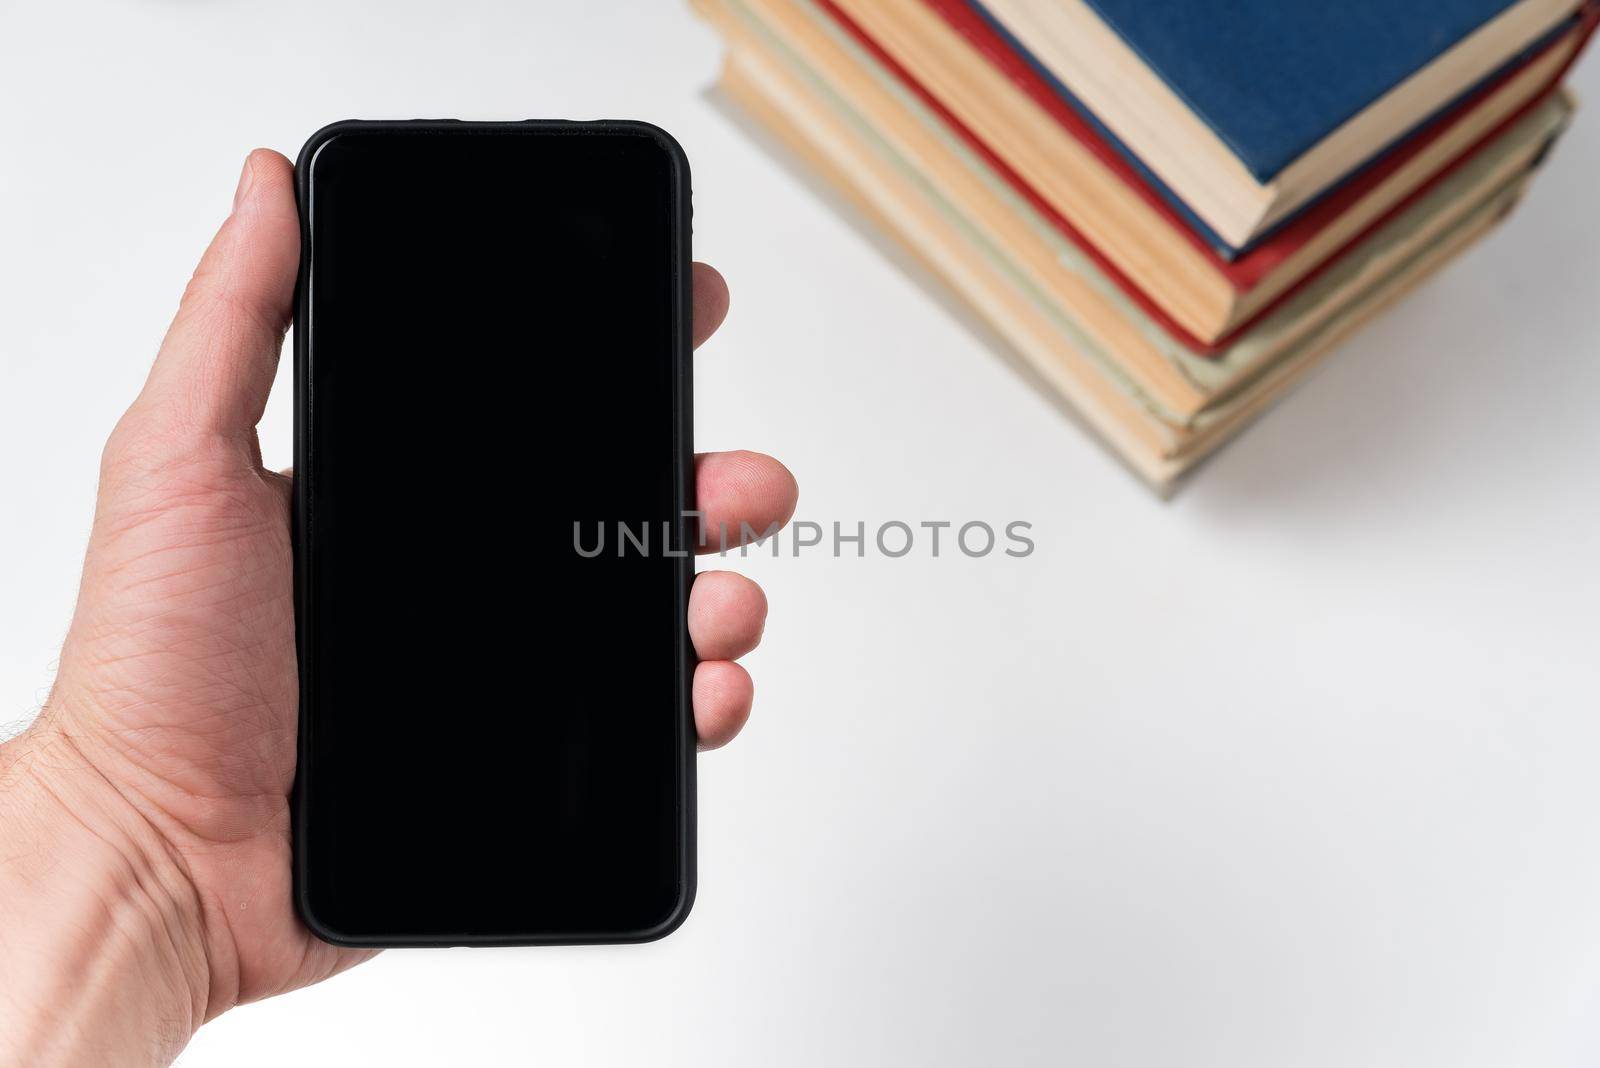 Mobile phone in hand on the background of books. E-book concept. White background, copy space.